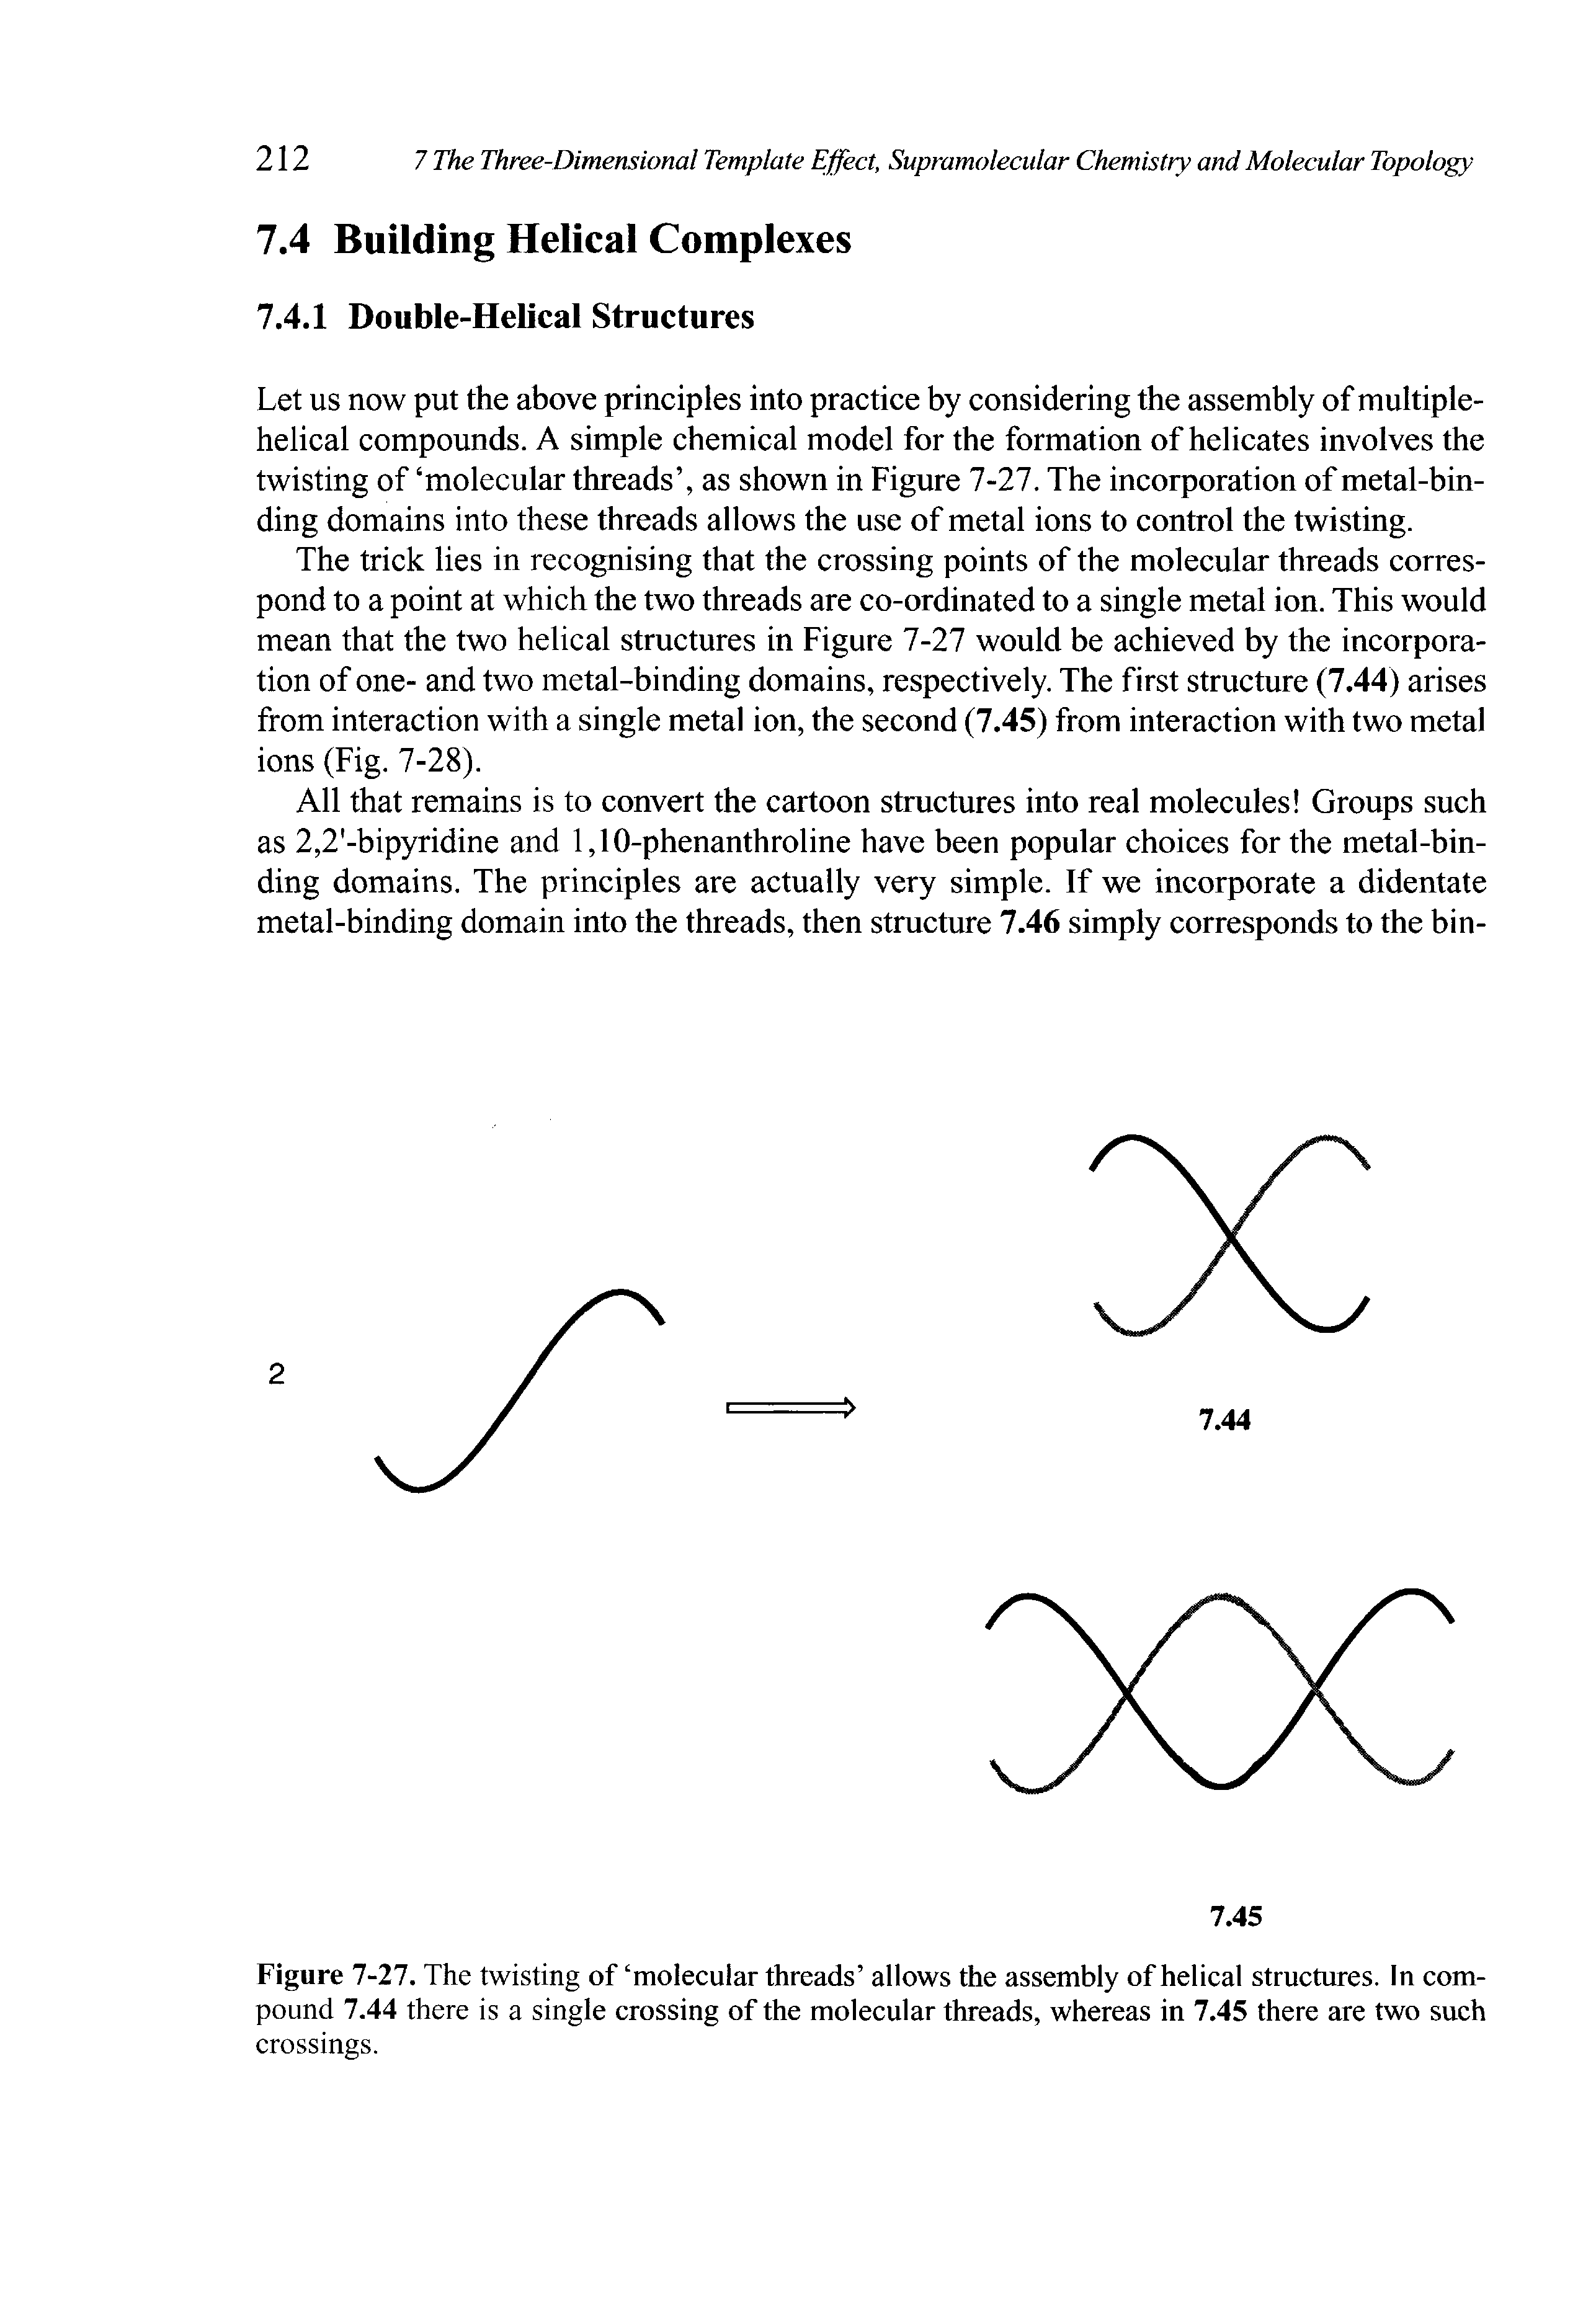 Figure 7-27. The twisting of molecular threads allows the assembly of helical structures. In compound 7.44 there is a single crossing of the molecular threads, whereas in 7.45 there are two such...